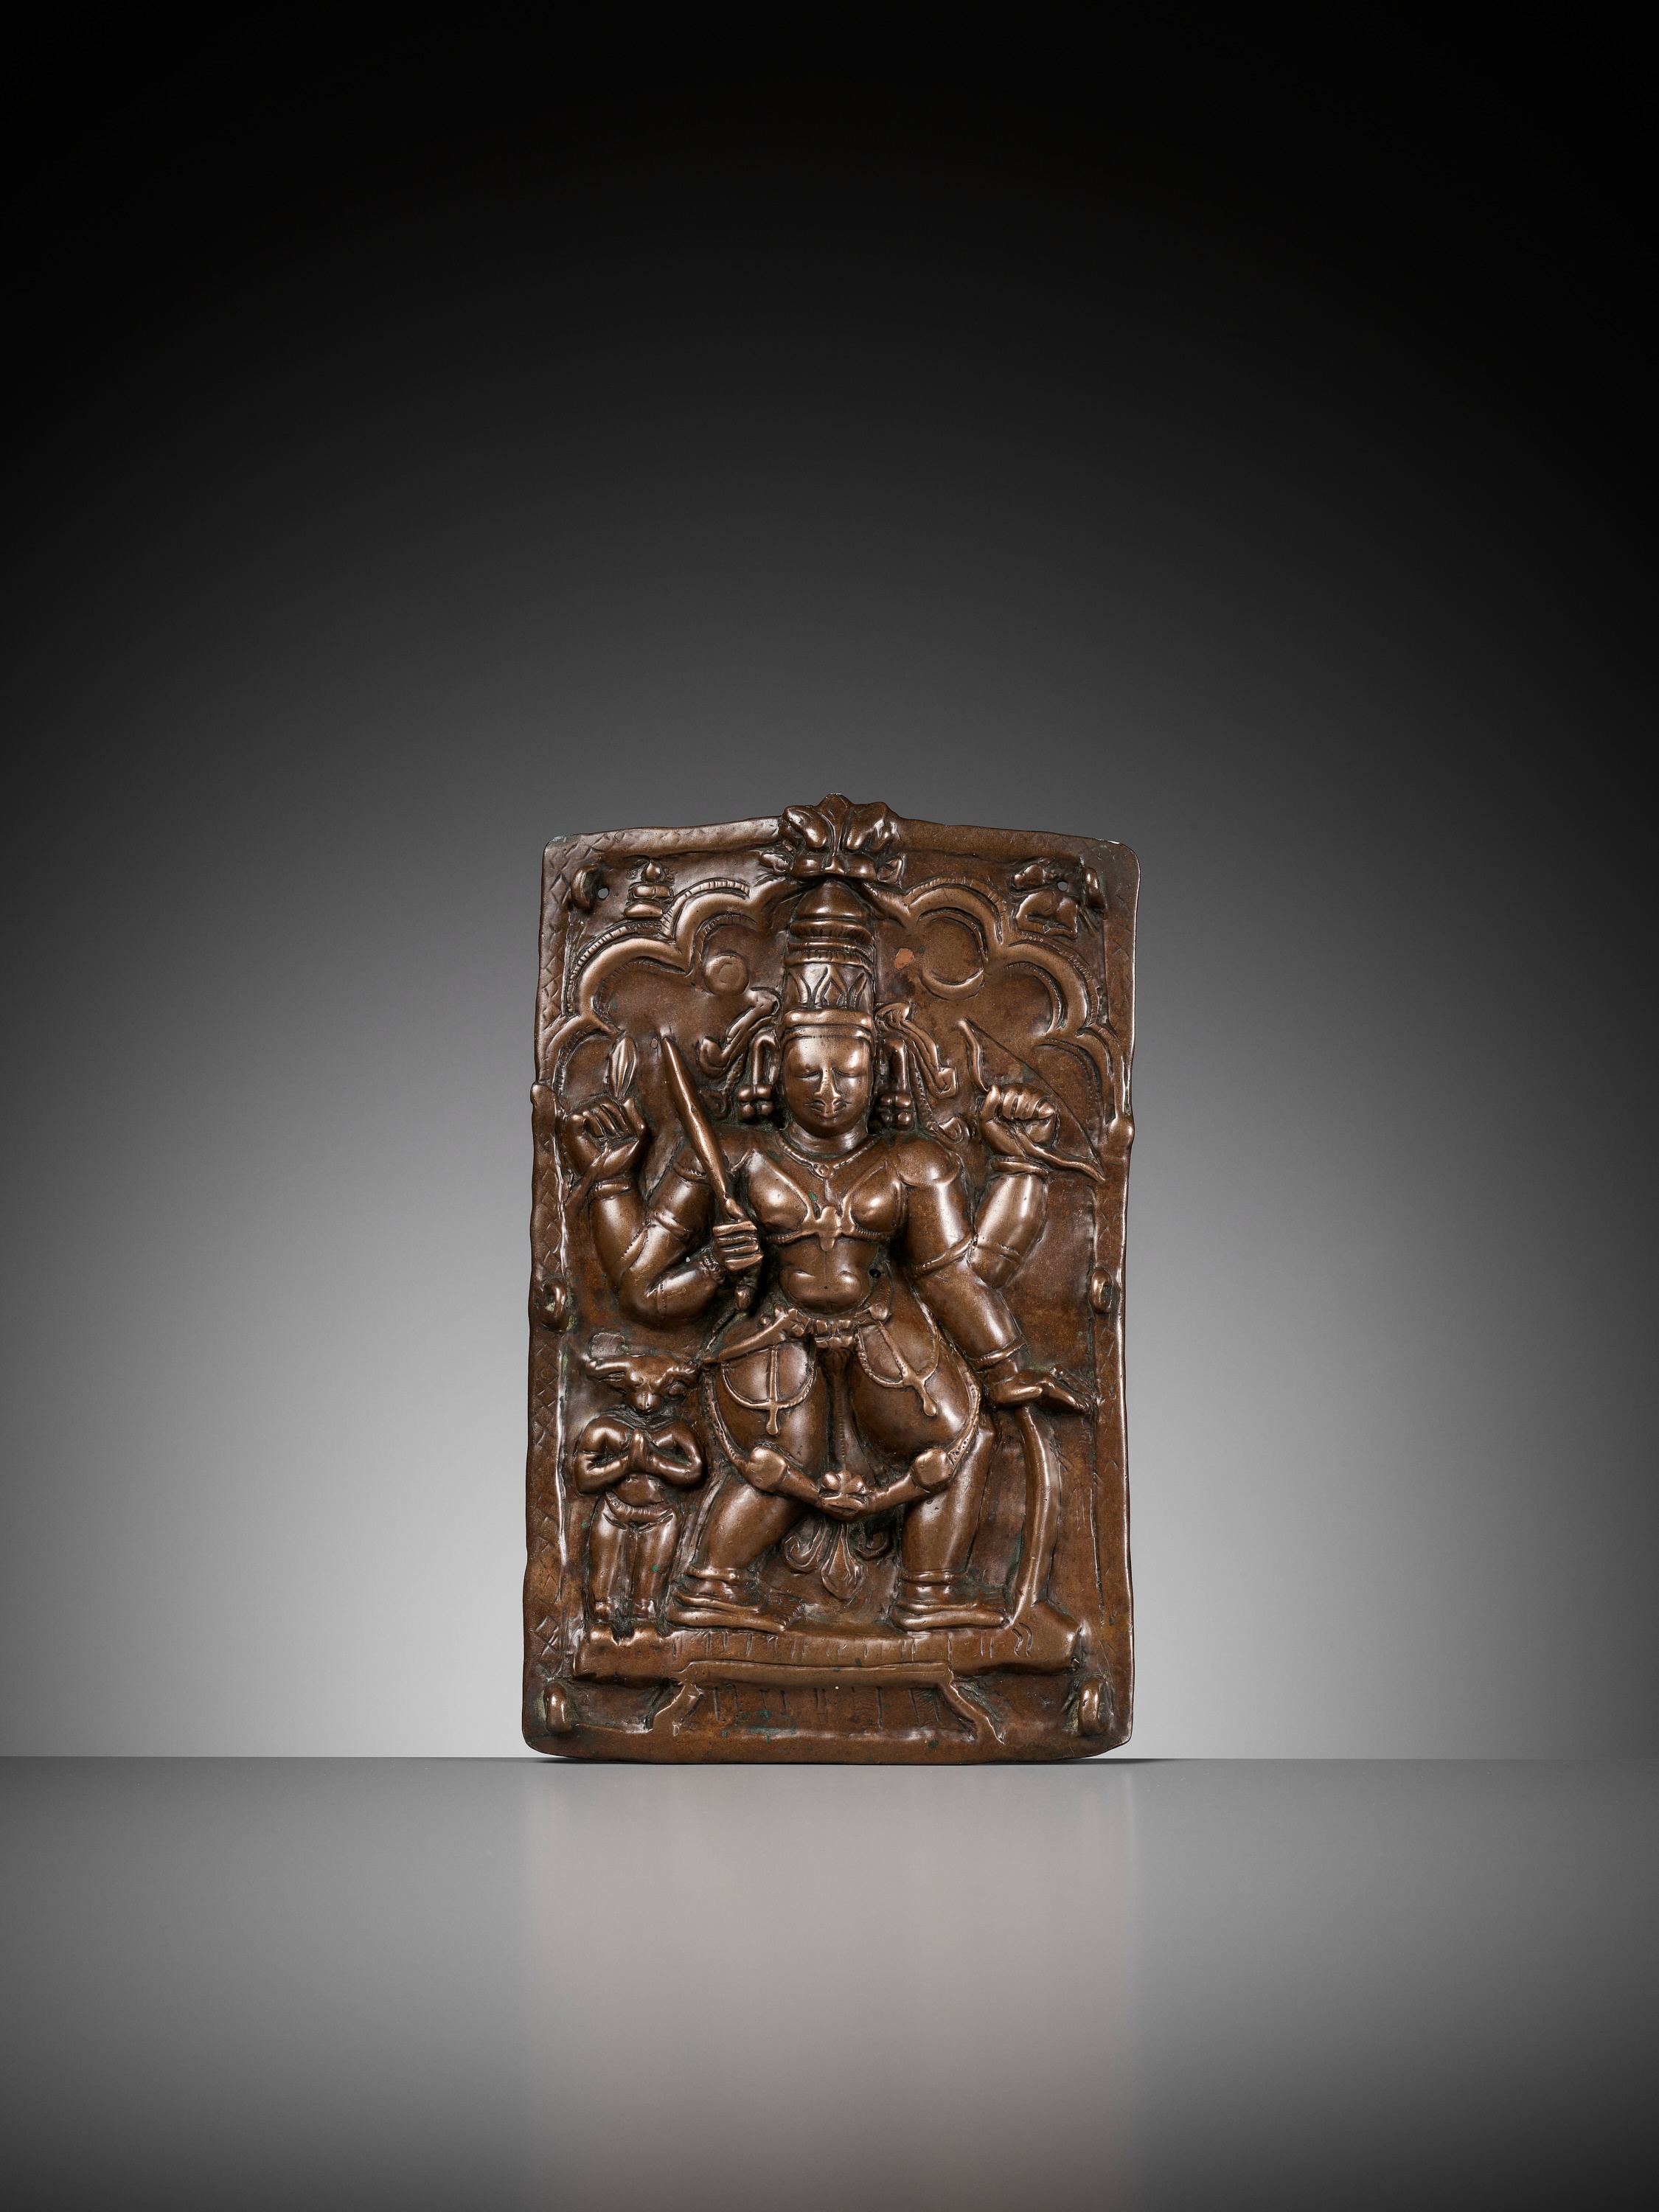 A CEREMONIAL COPPER SHIELD DEPICTING VIRABHADRA, 17TH-18TH CENTURY - Image 9 of 9